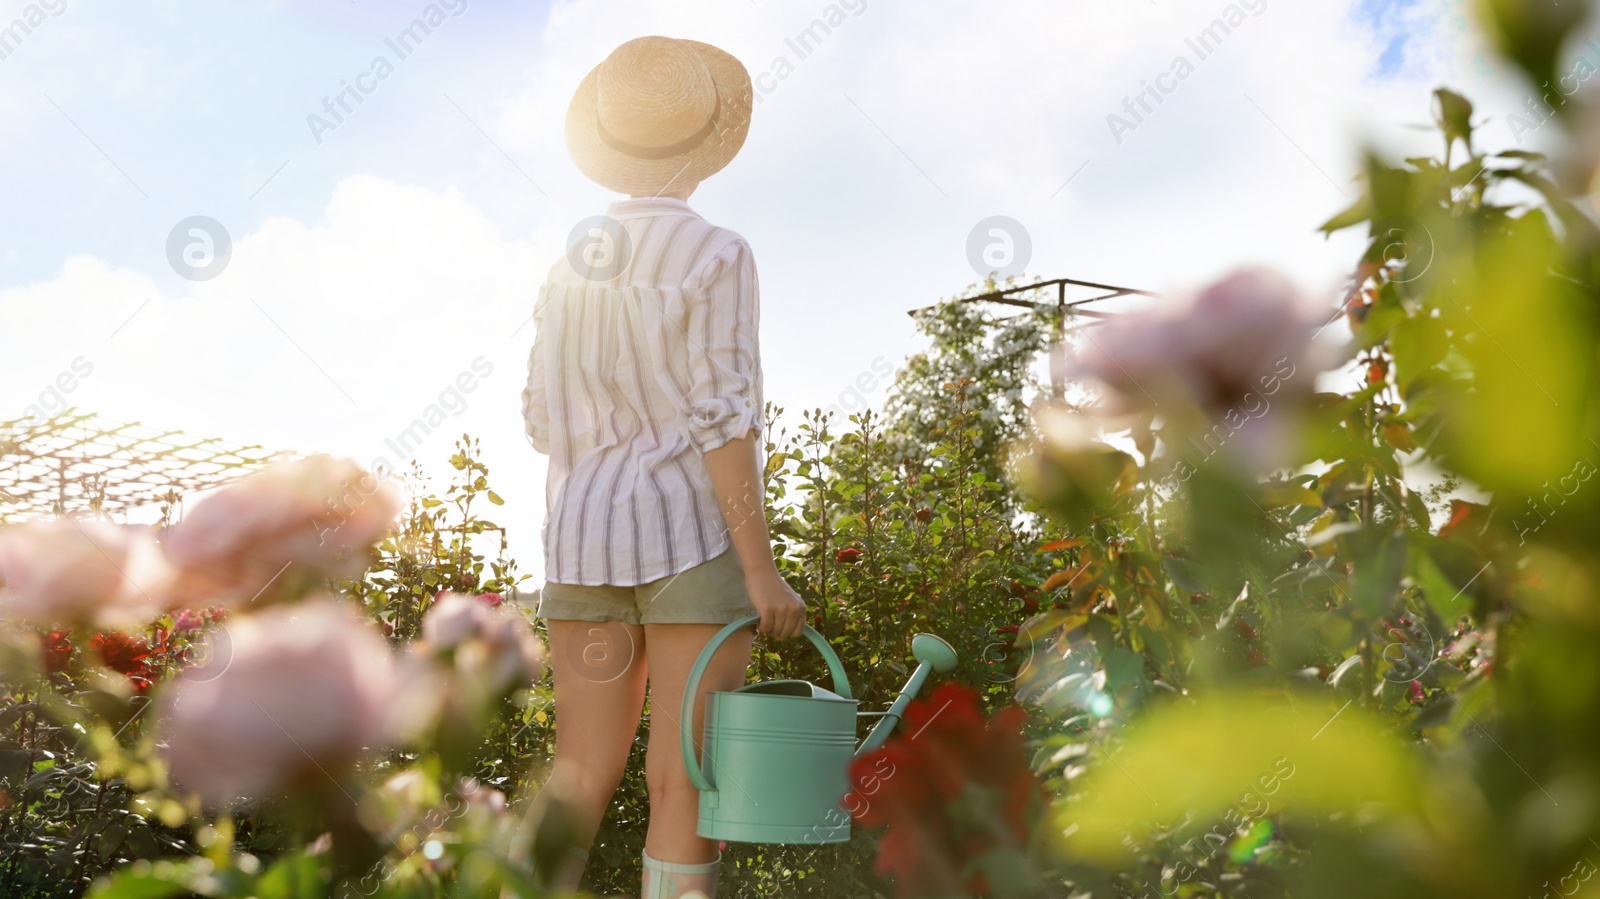 Photo of Woman with watering can near rose bushes outdoors. Gardening tool